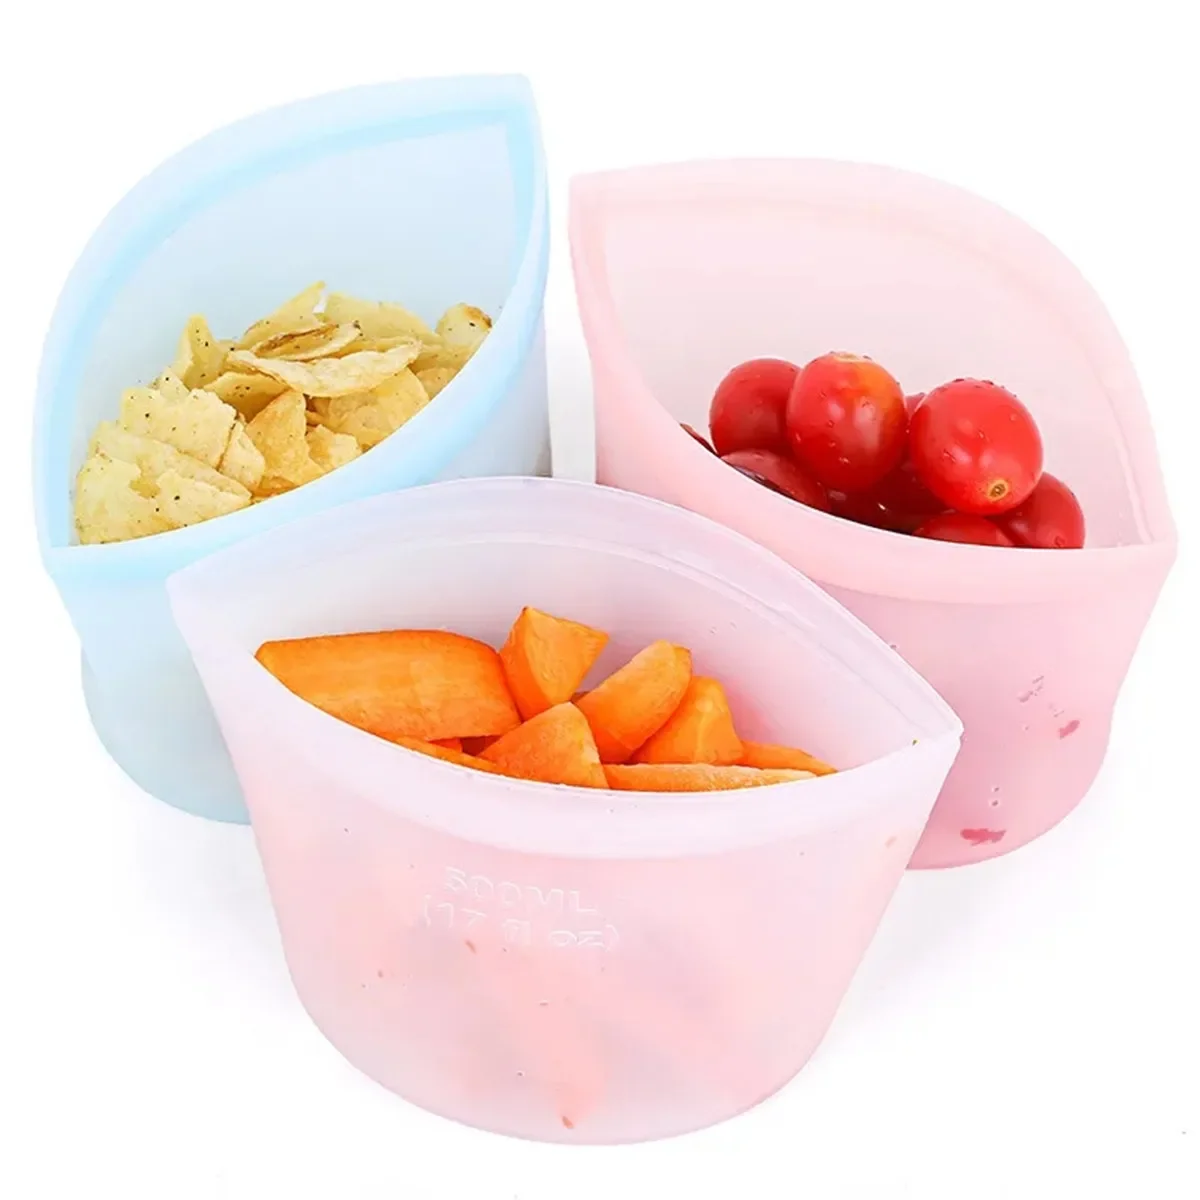 Silicone Food Storage Bags Leakproof Containers Reusable Fresh-keeping Fruit Sealed Freezer Bag Refrigerator Food Organizer 3pcs